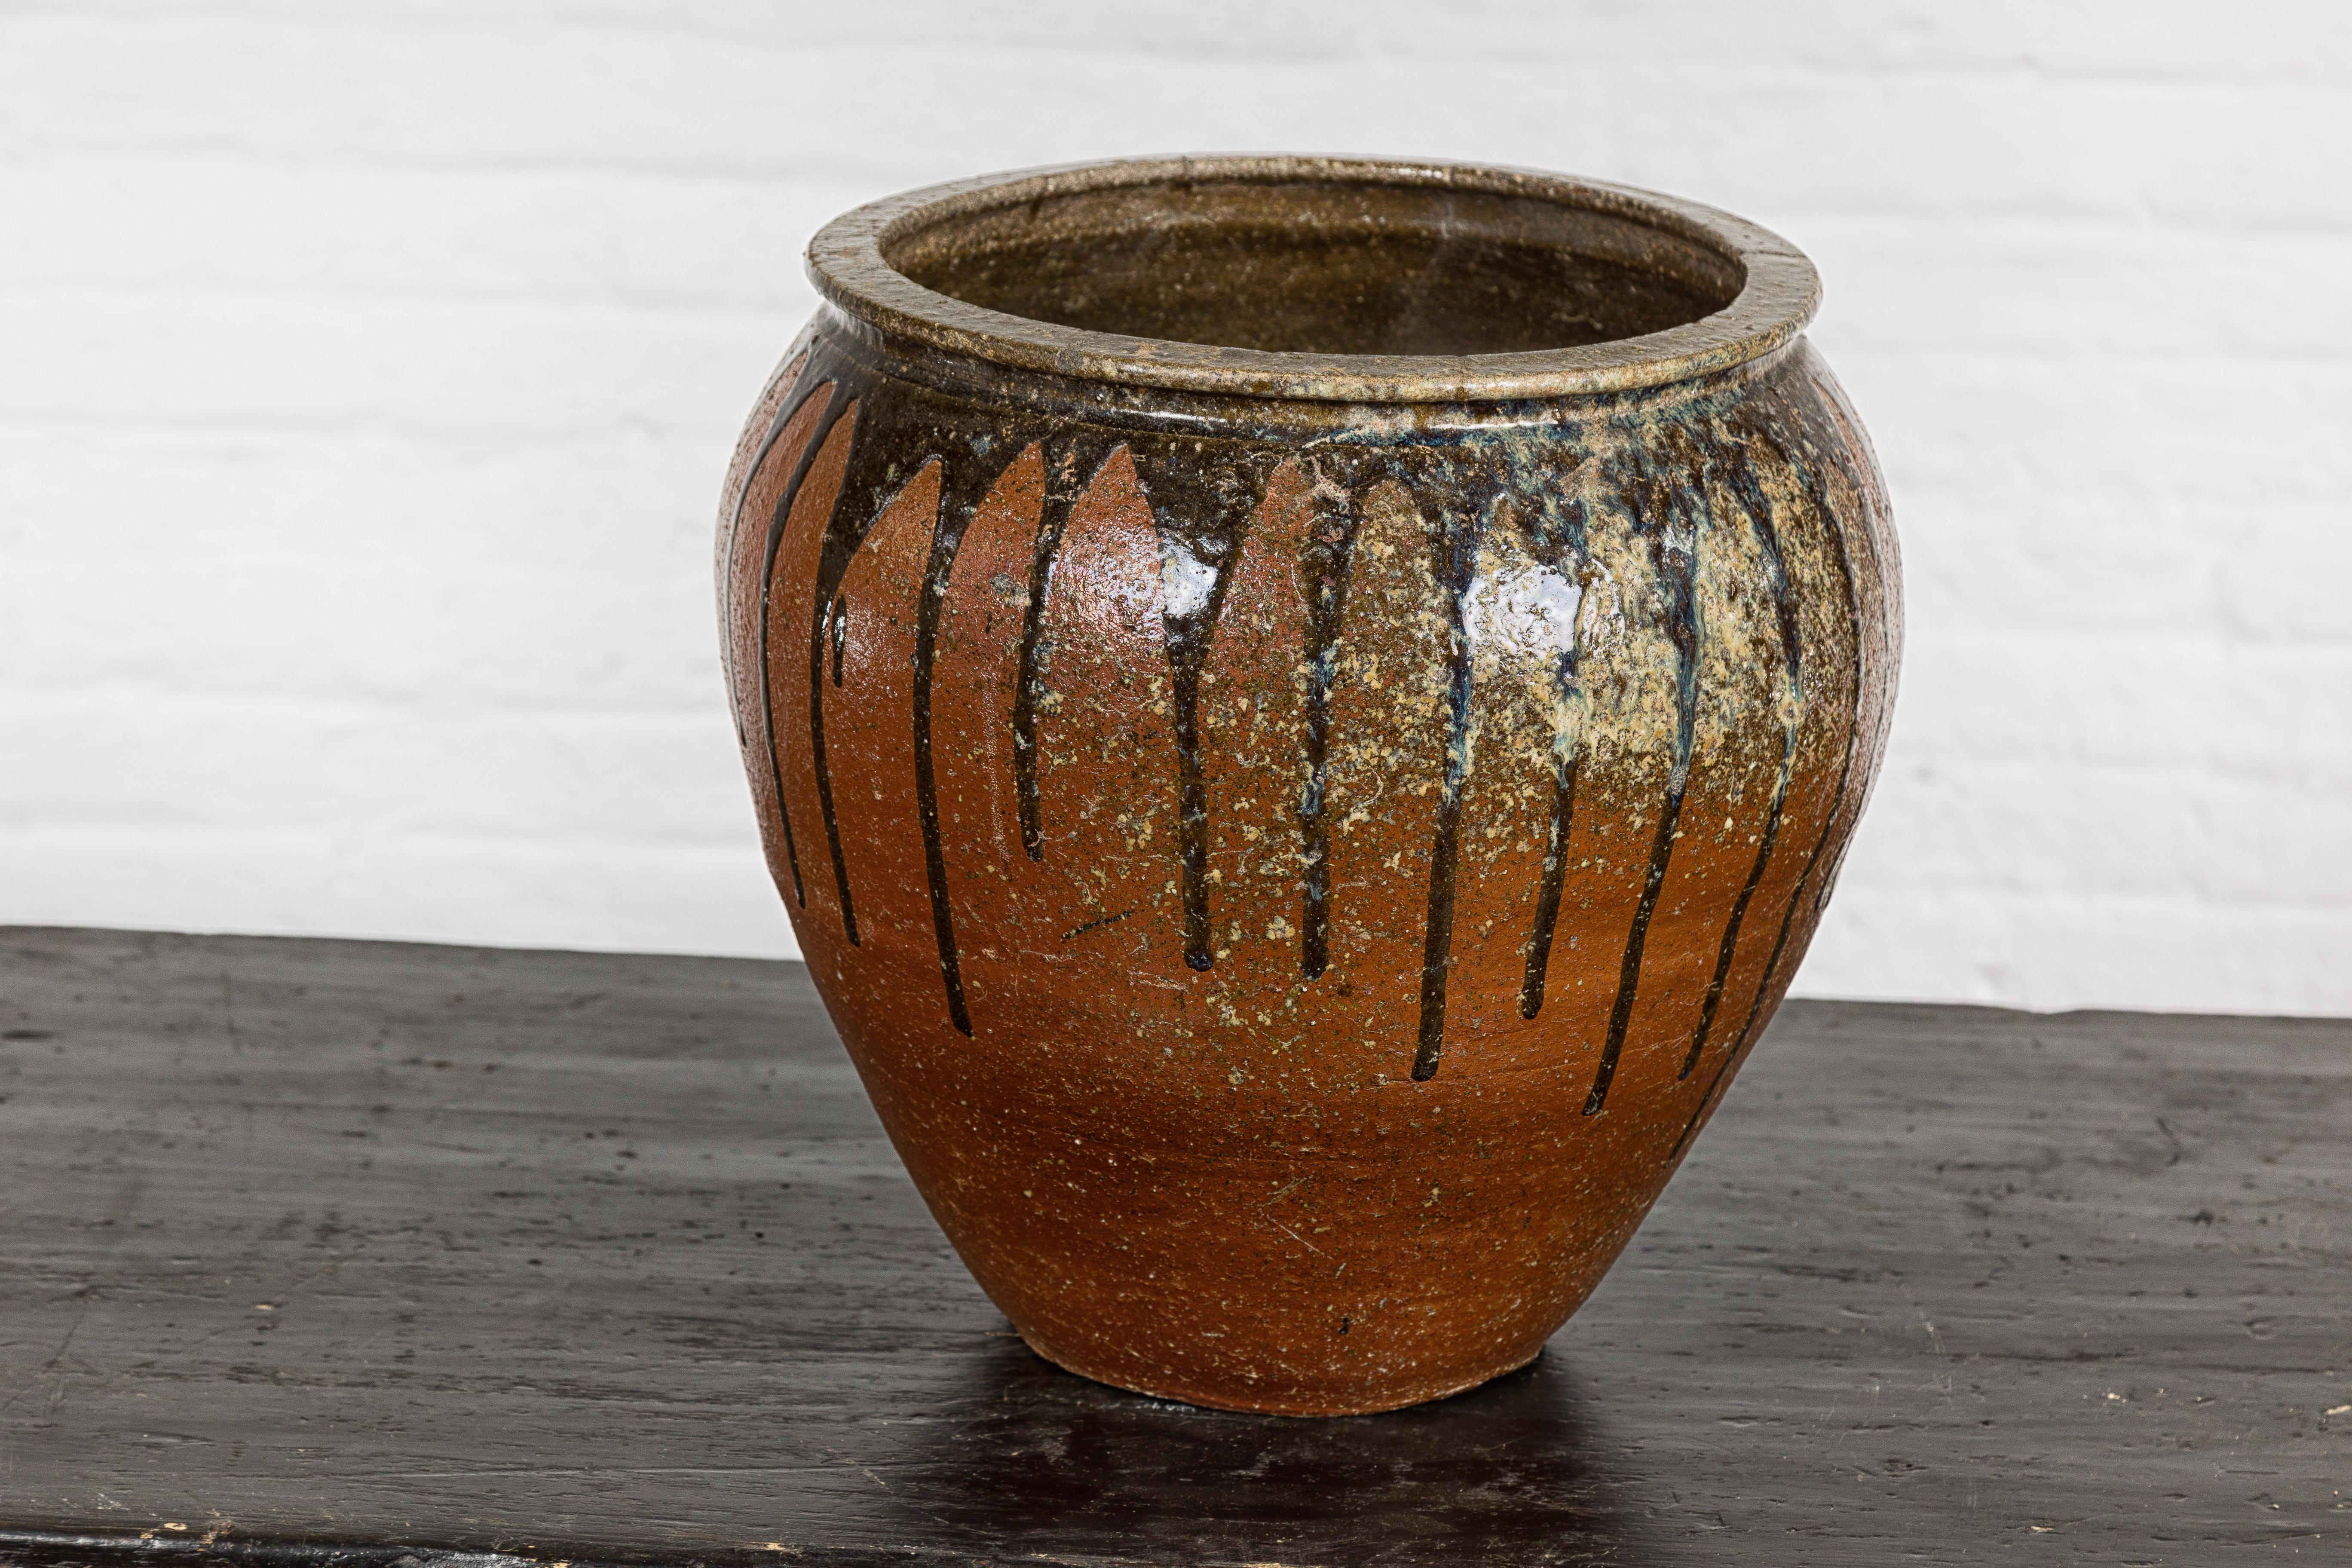 Japanese Tamba Ware Brown Glazed Ceramic Salt Pot Planter with Dripping For Sale 5